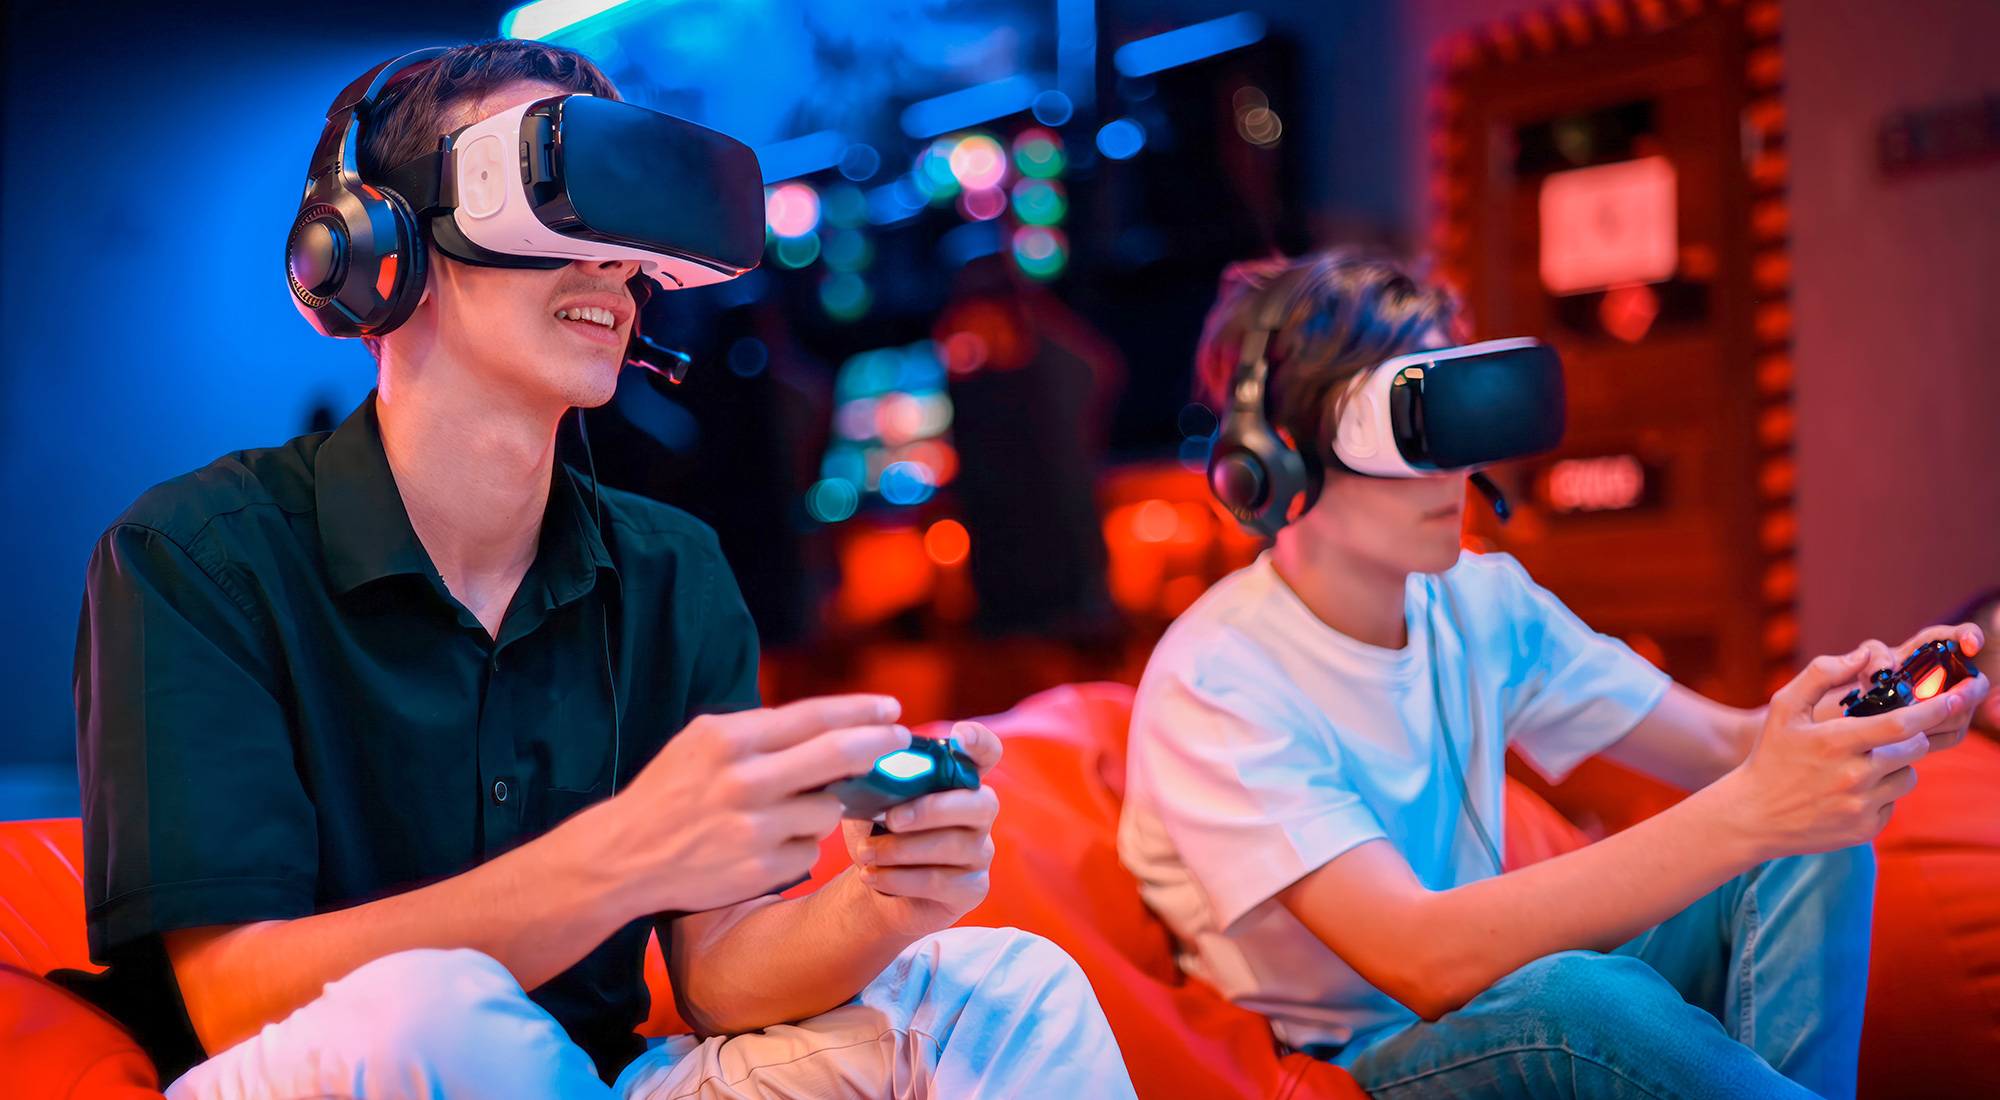 Virtual reality entertainment in gaming industry